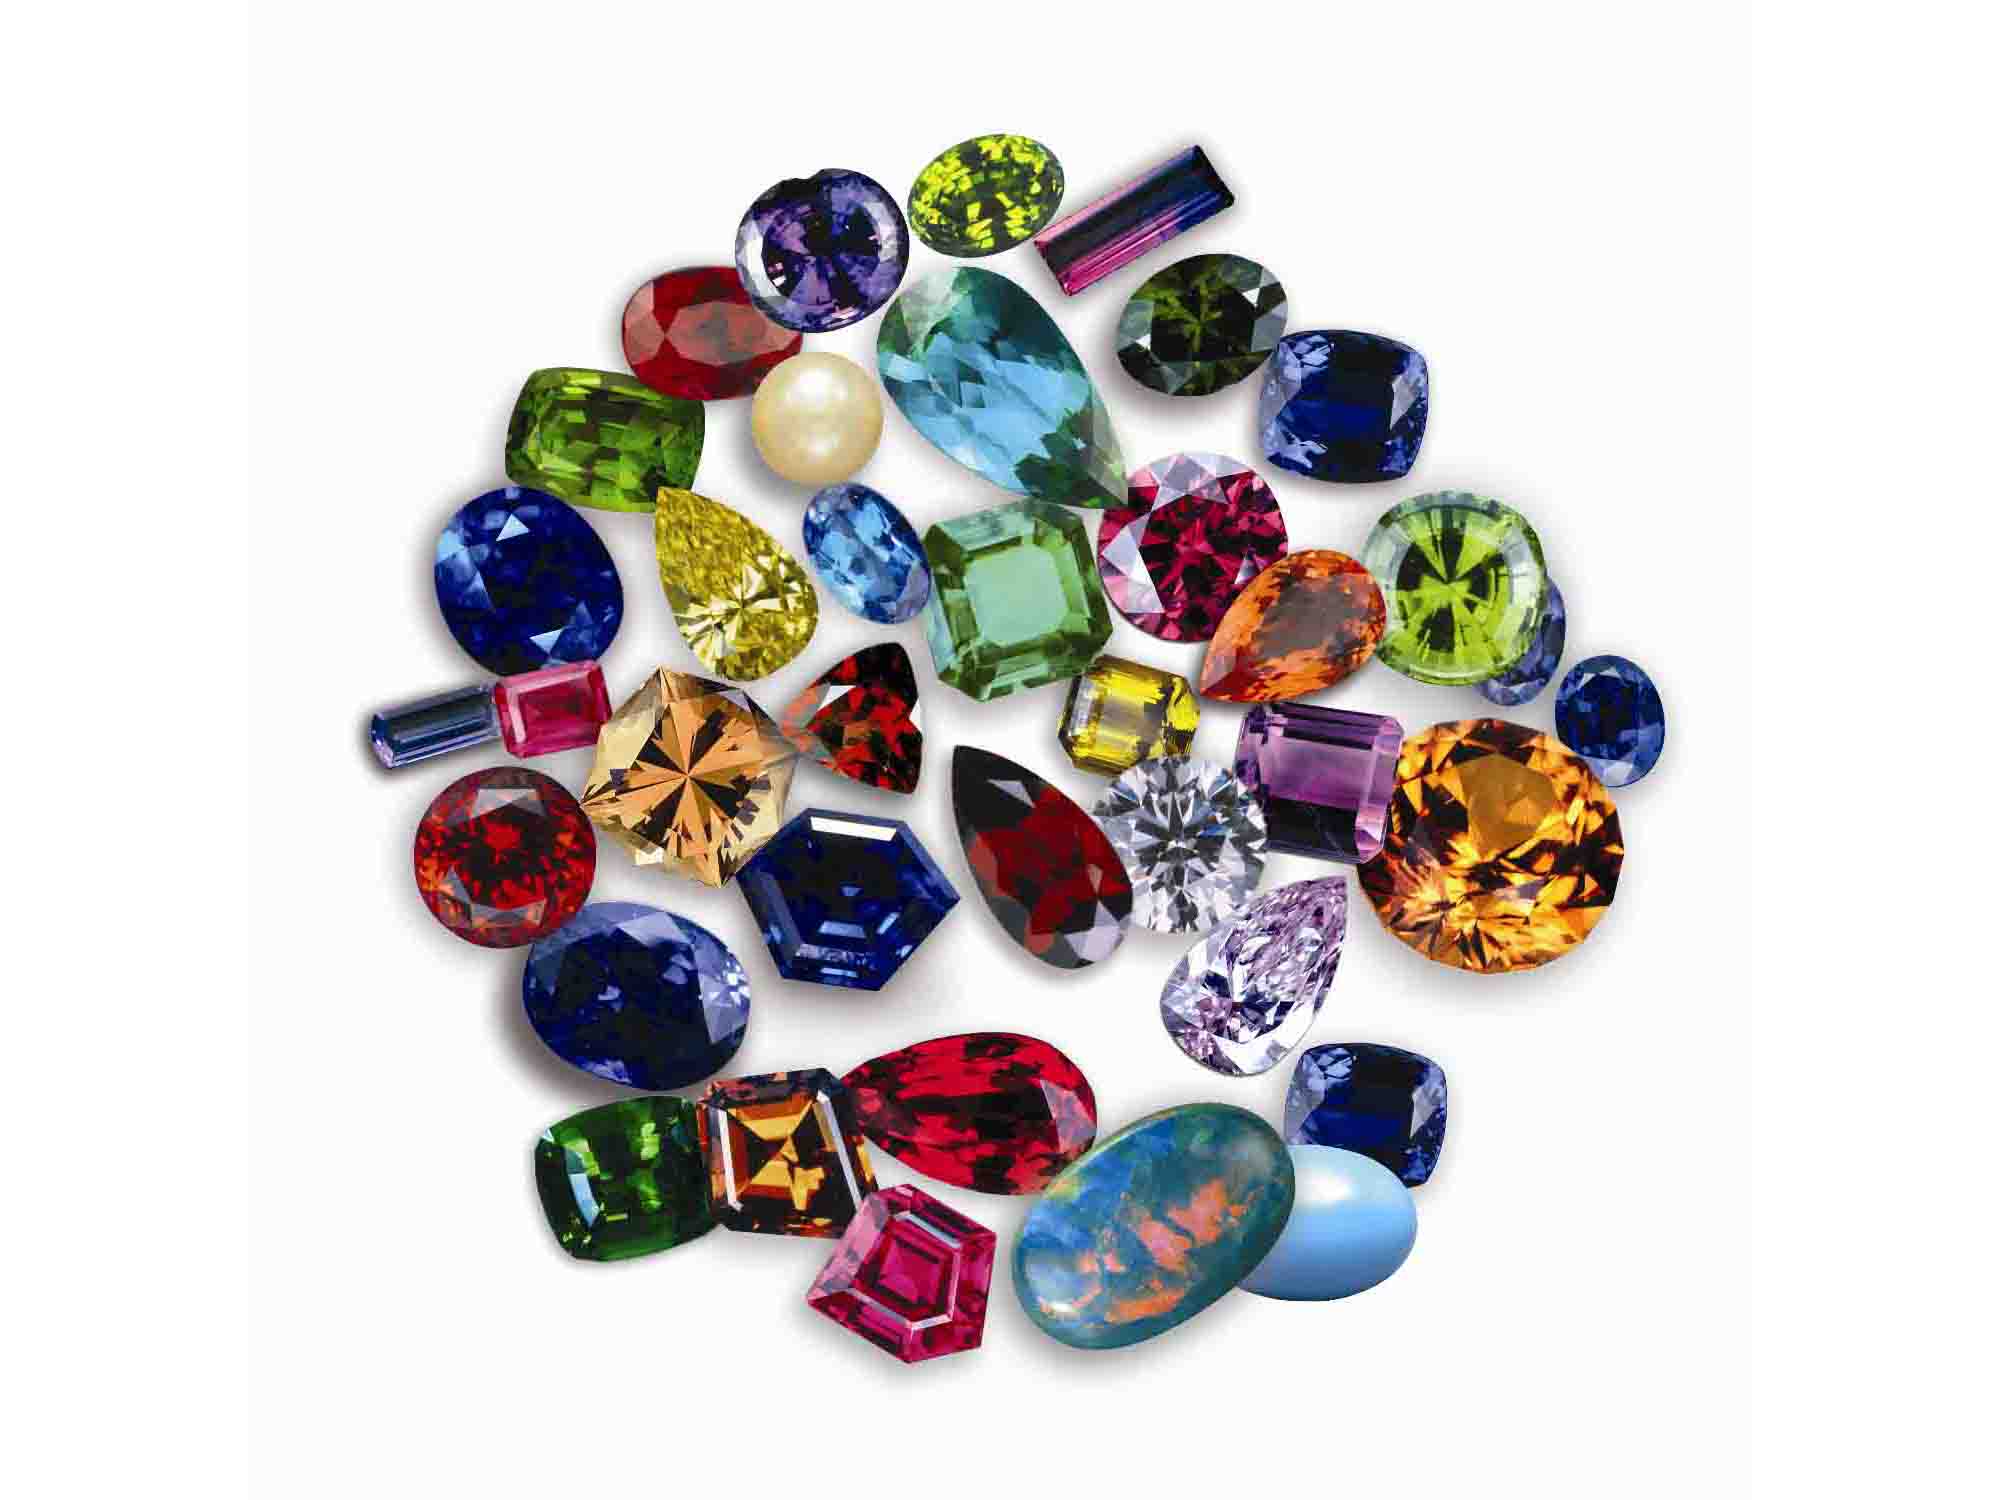 Birthstones and Gemstones – How to Choose The Right One?